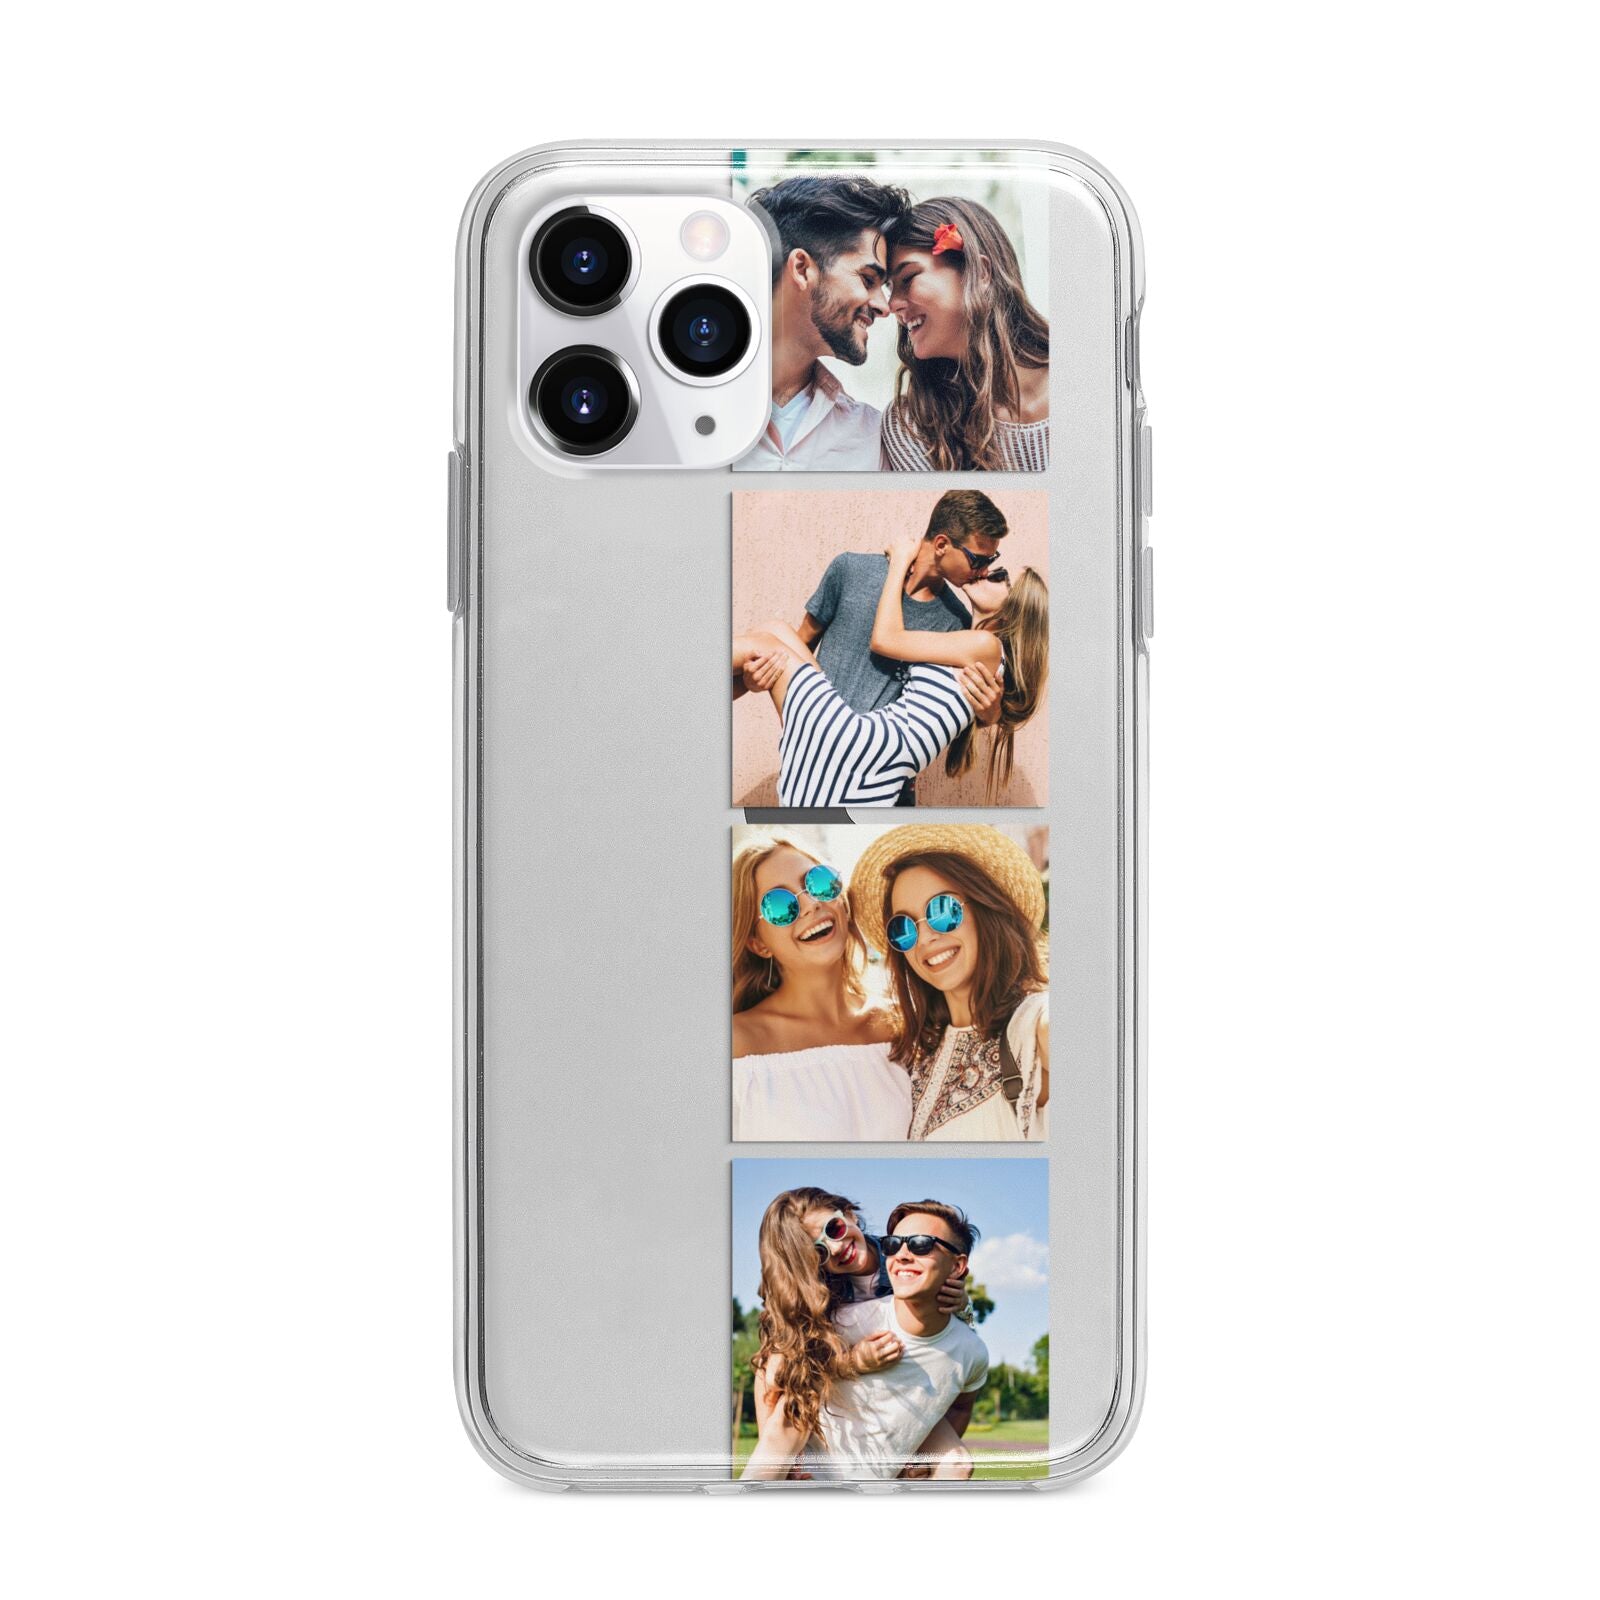 Photo Strip Montage Upload Apple iPhone 11 Pro in Silver with Bumper Case